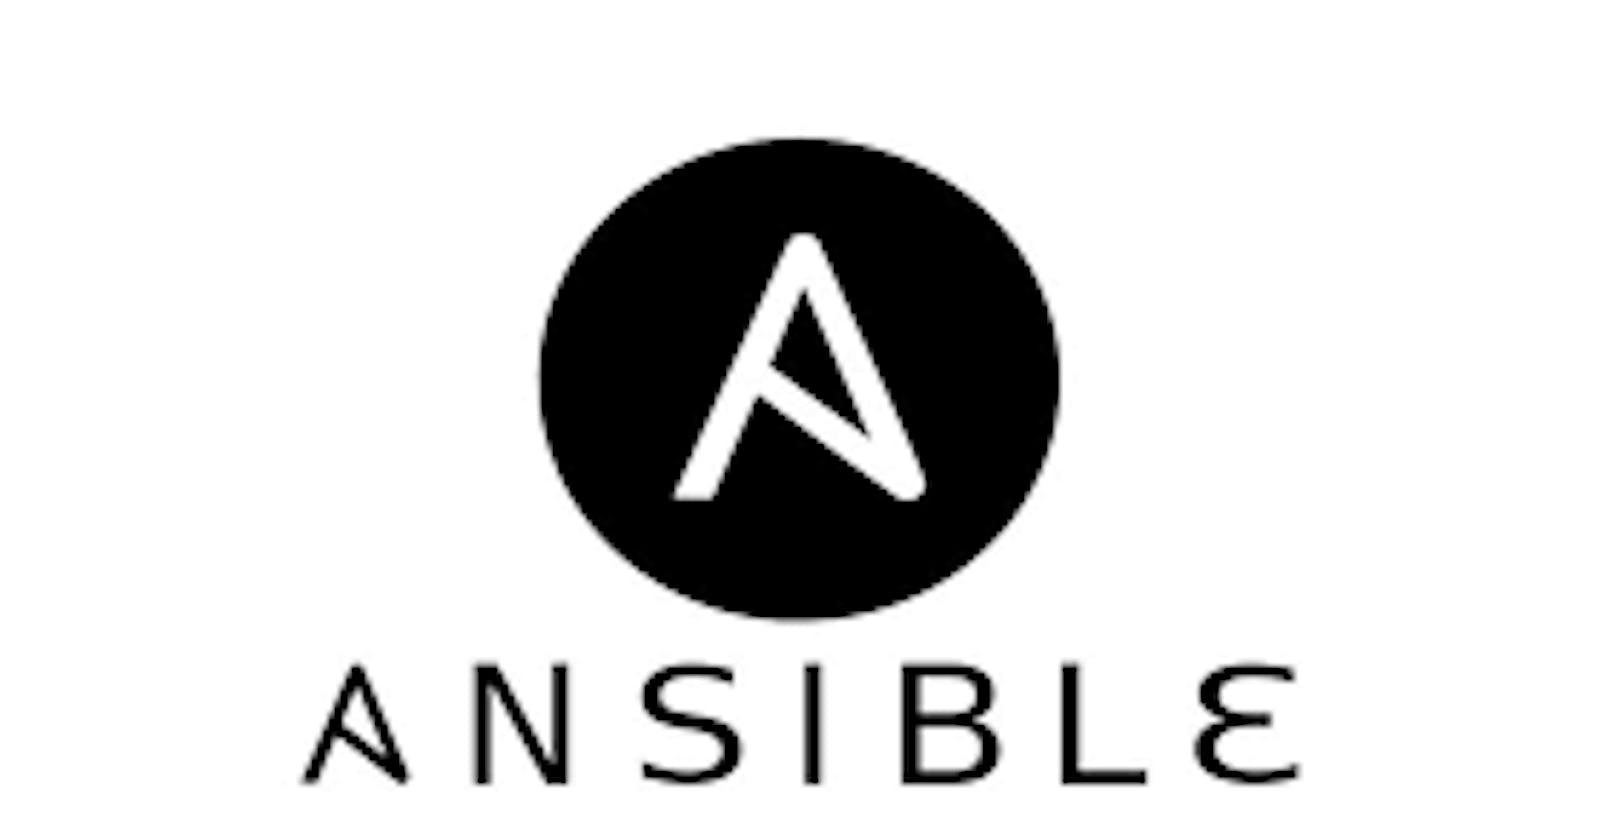 Day 58: Ansible Playbooks